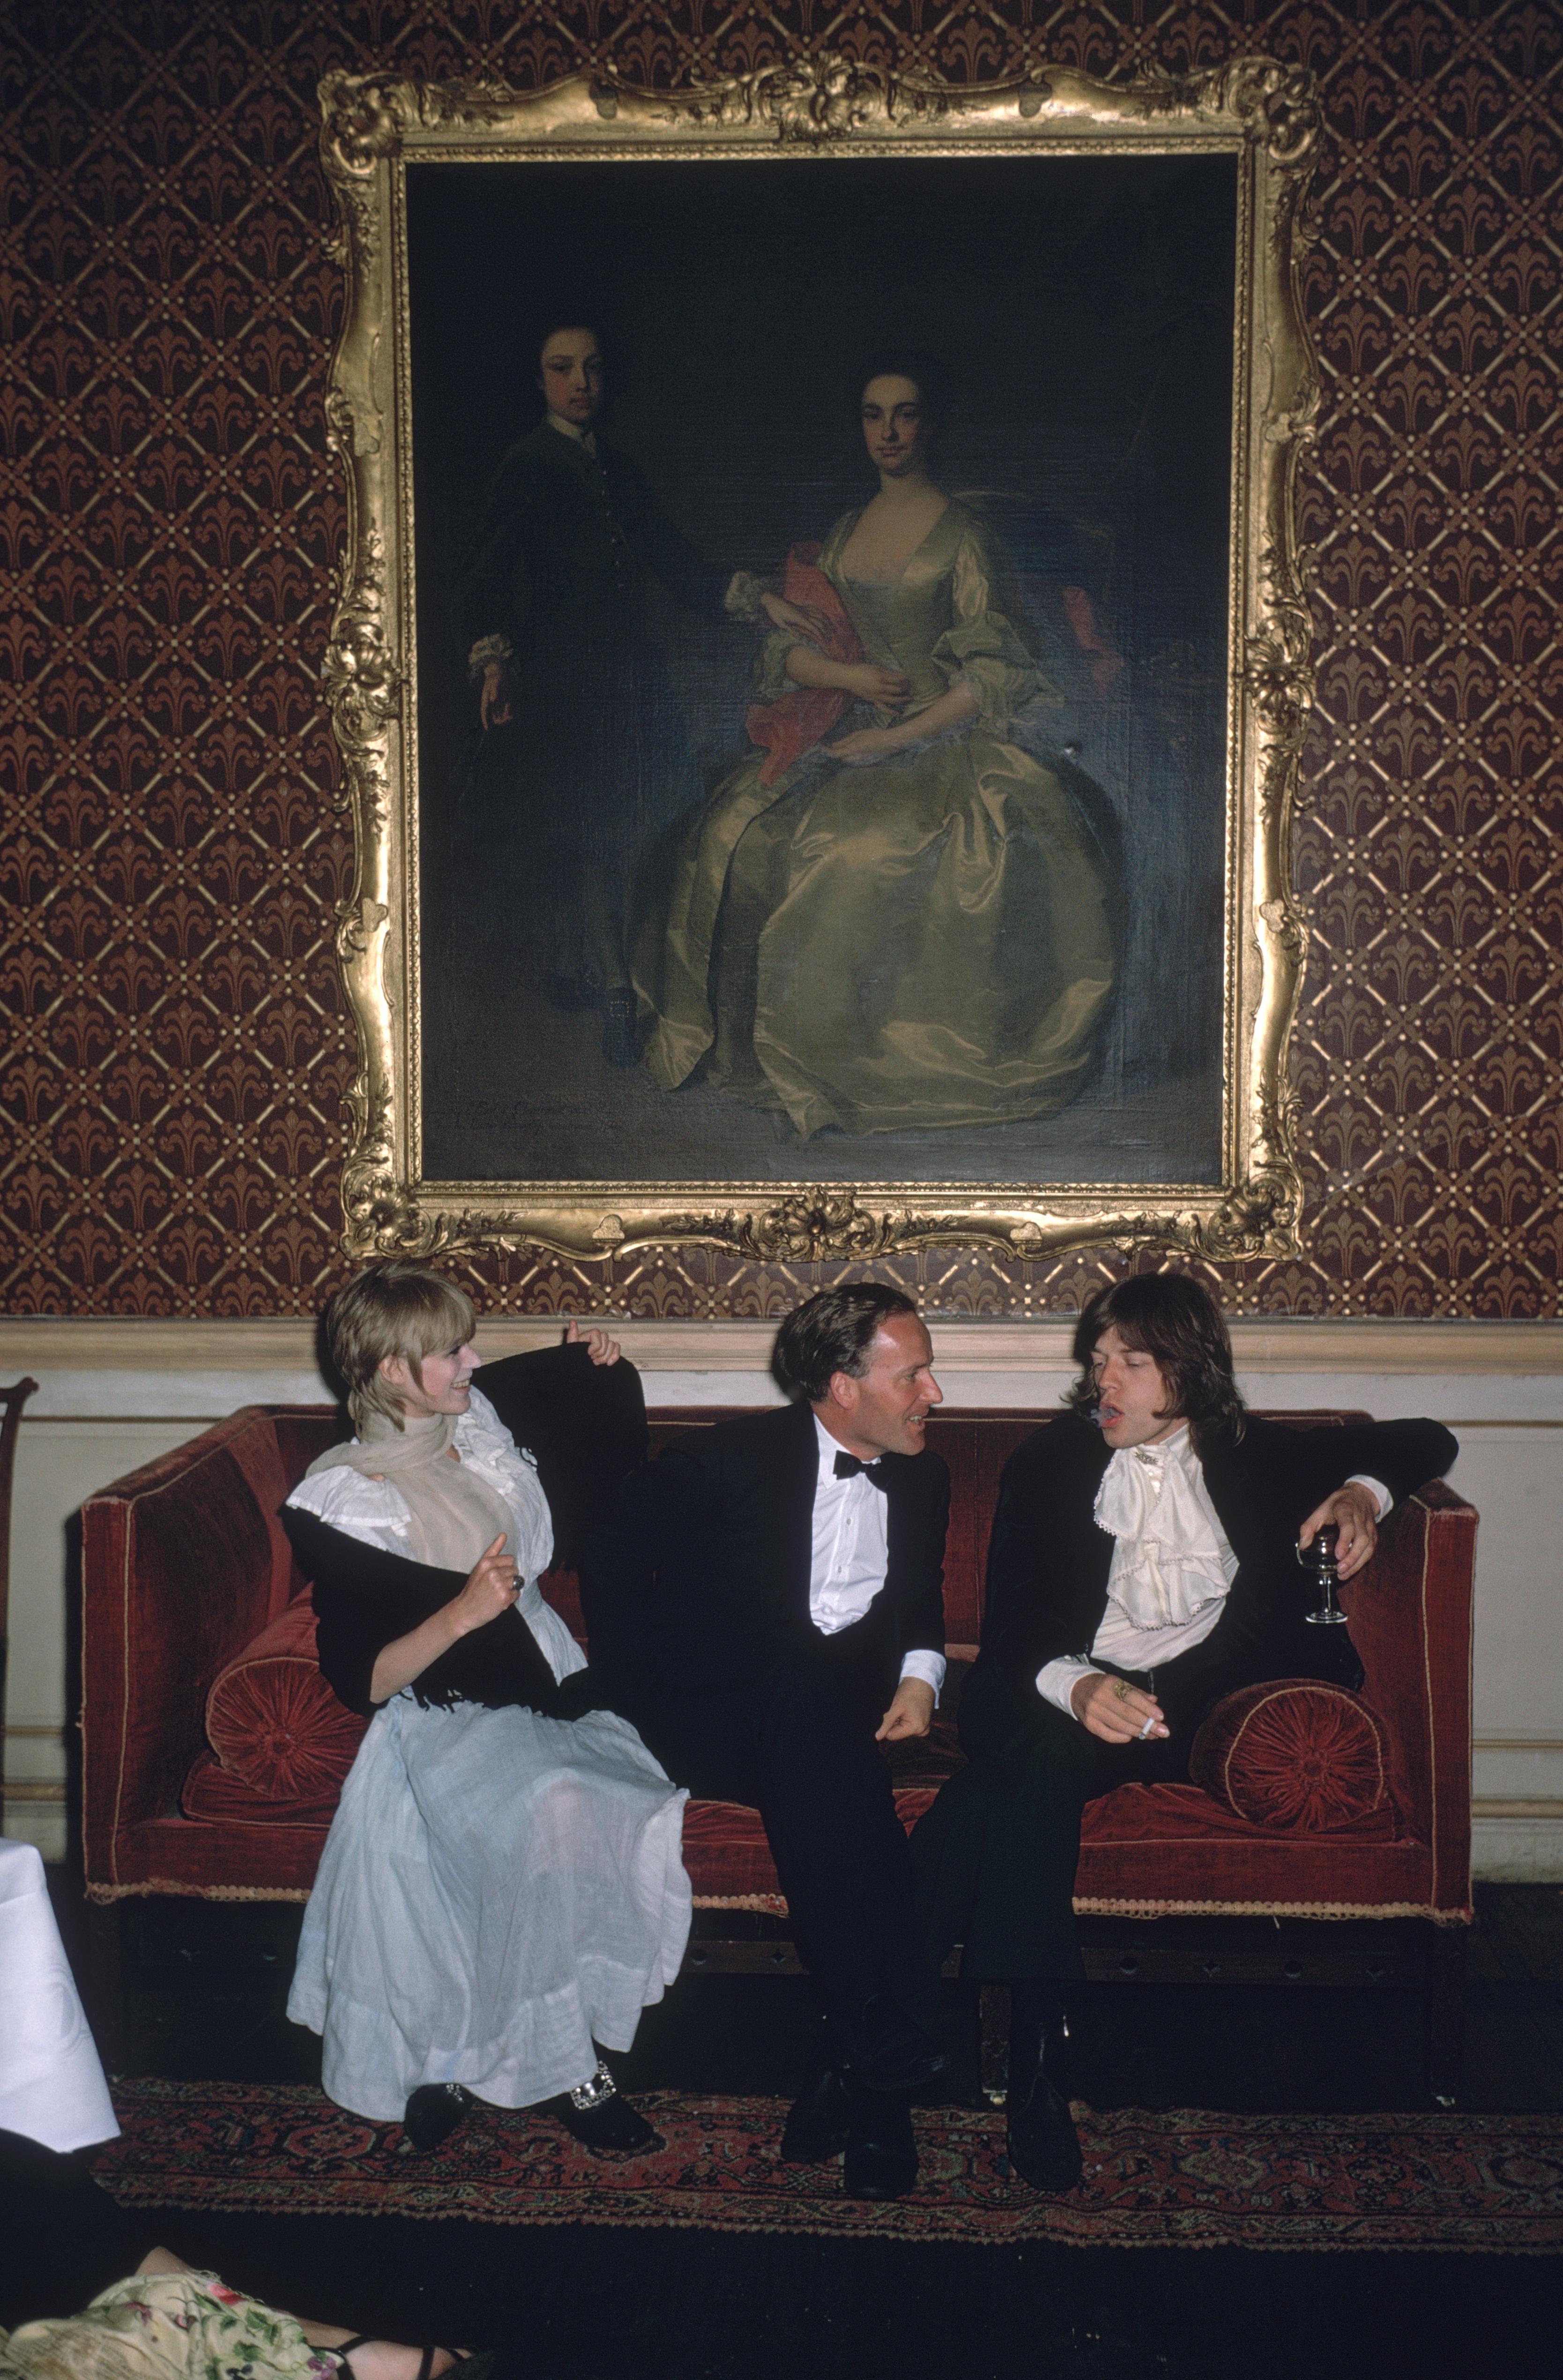 'Pop And Society' 1968 Slim Aarons Limited Estate Edition

1968: From left to right; singer Marianne Faithfull, the Honorable Desmond Guinness and Mick Jagger (of the Rolling Stones) sit on a sofa under a large gilt framed painting of a woman in